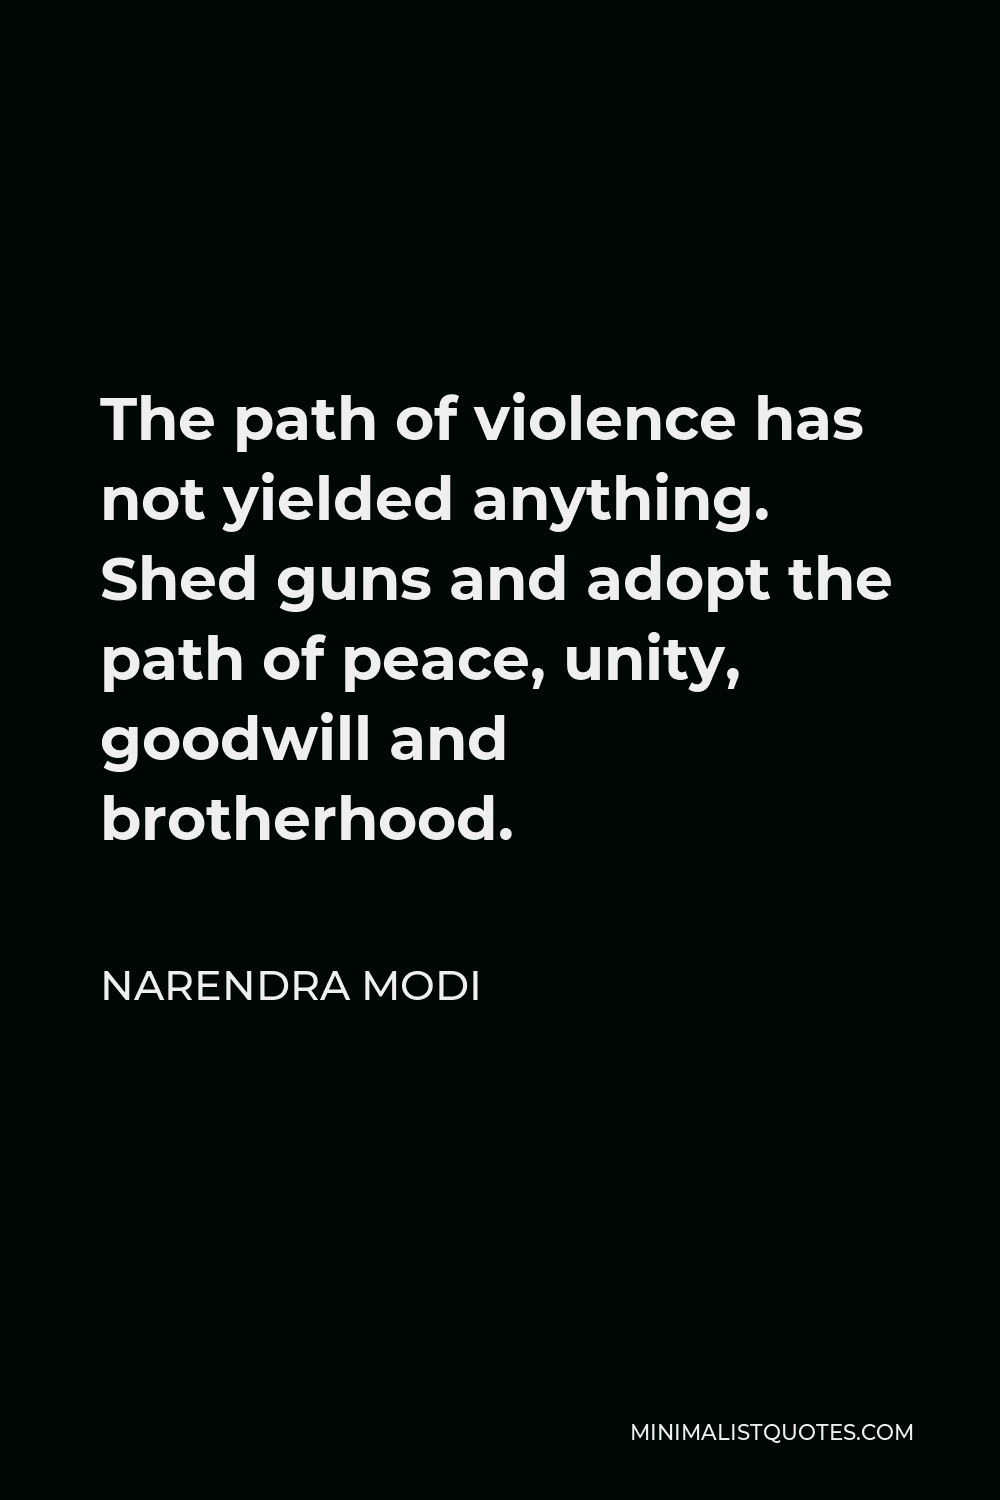 Narendra Modi Quote - The path of violence has not yielded anything. Shed guns and adopt the path of peace, unity, goodwill and brotherhood.